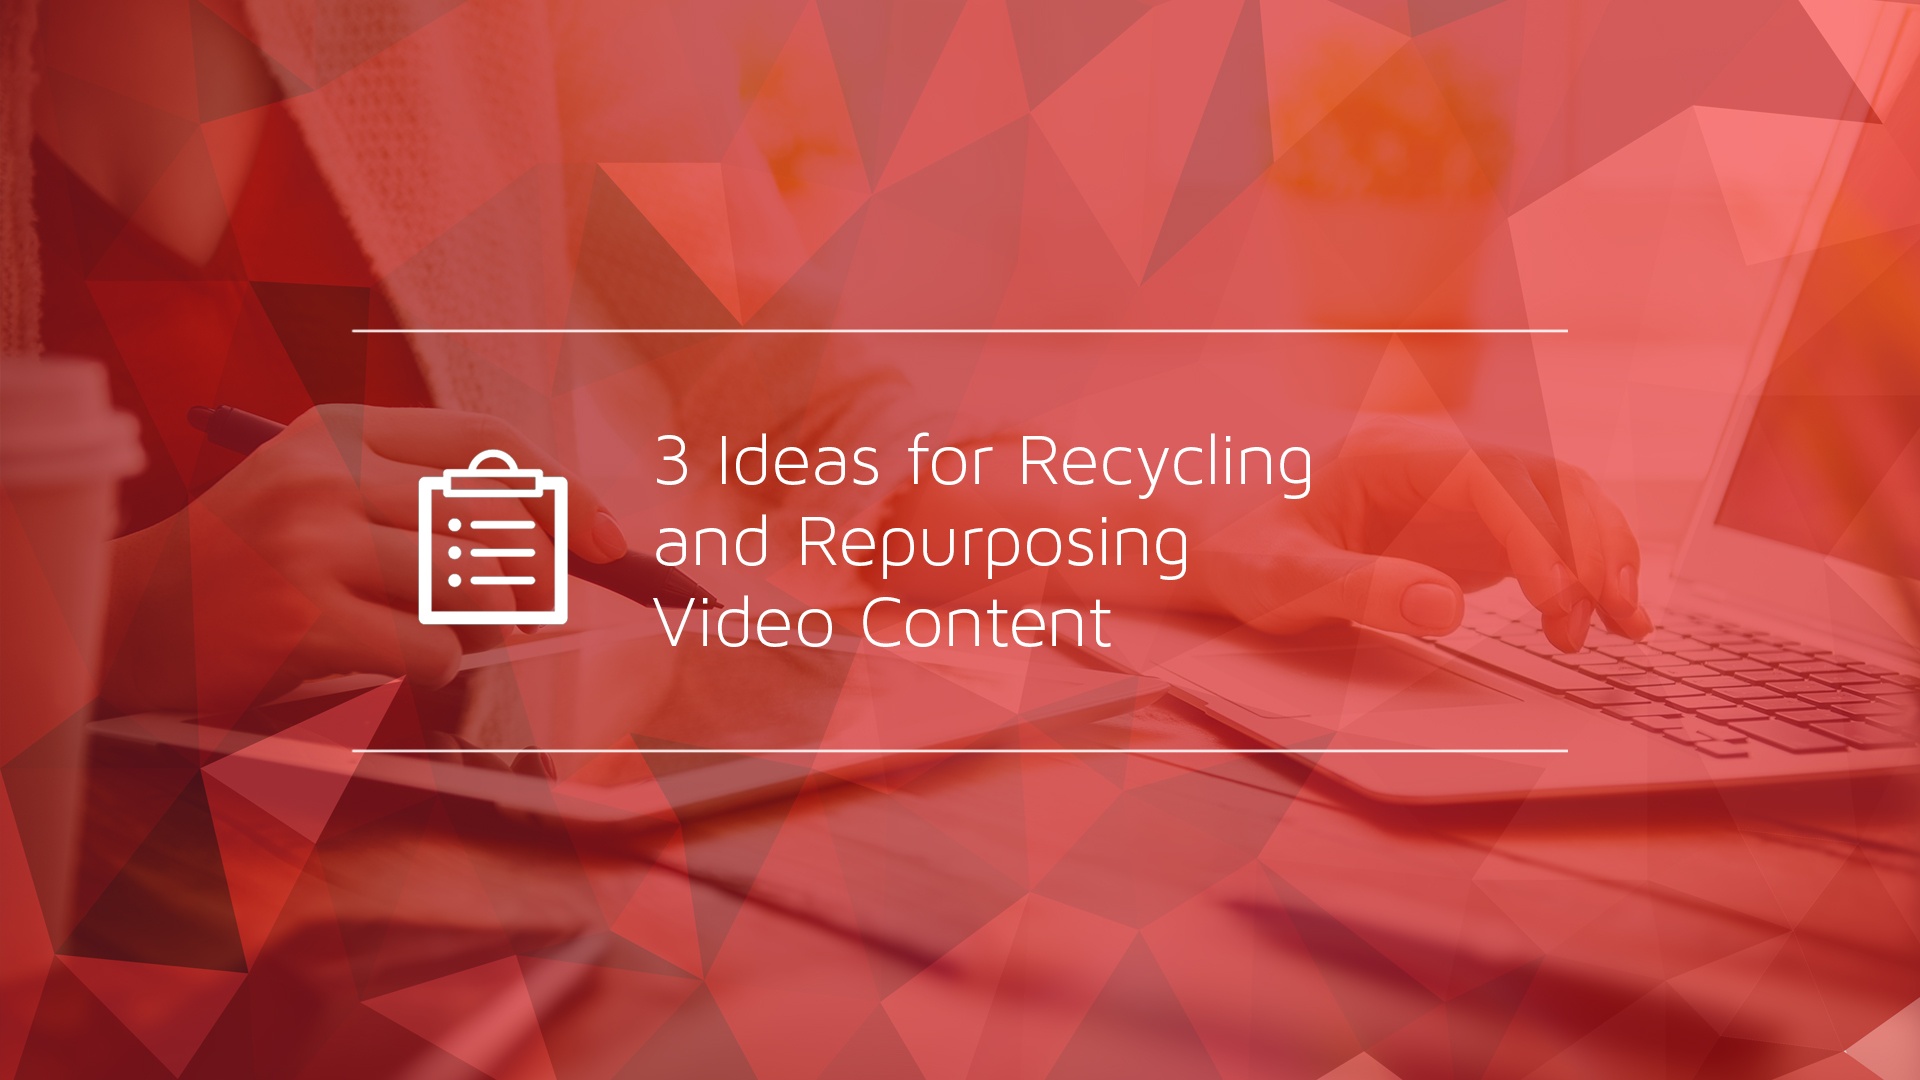 3 Ideas for Recycling and Repurposing Video Content.jpg